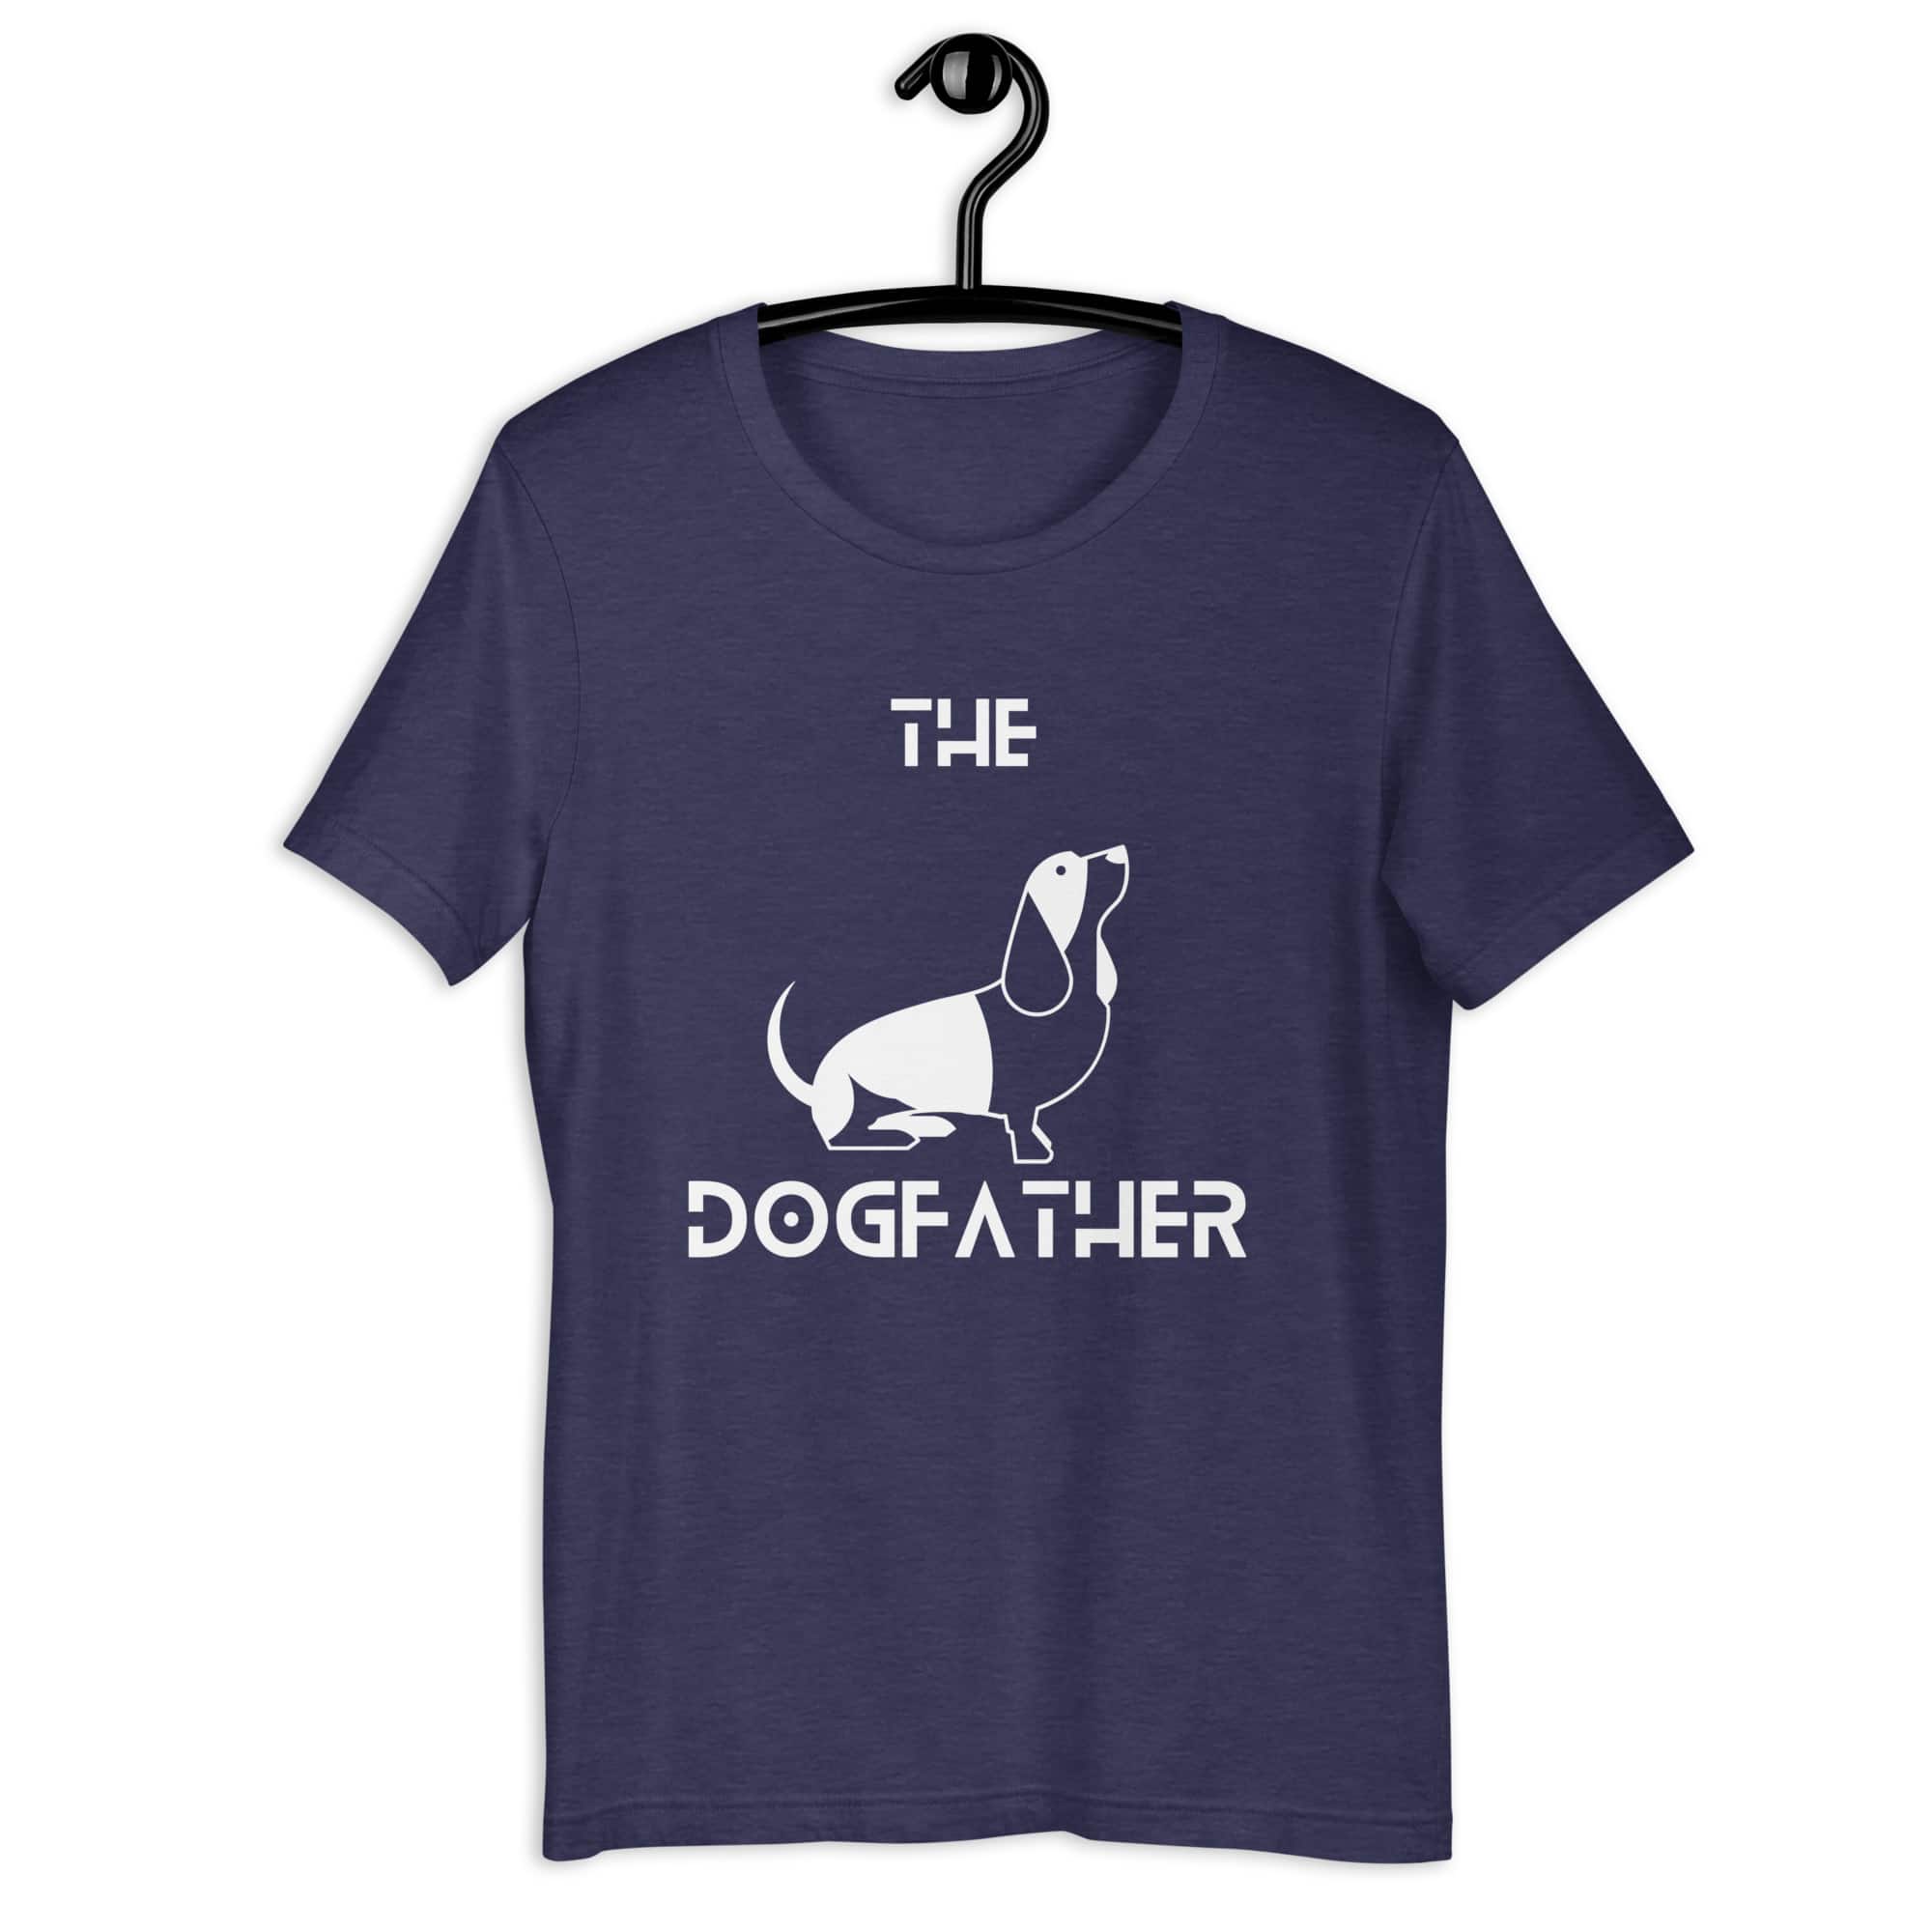 The Dogfather Hounds Unisex T-Shirt. Heather Midnight Navy